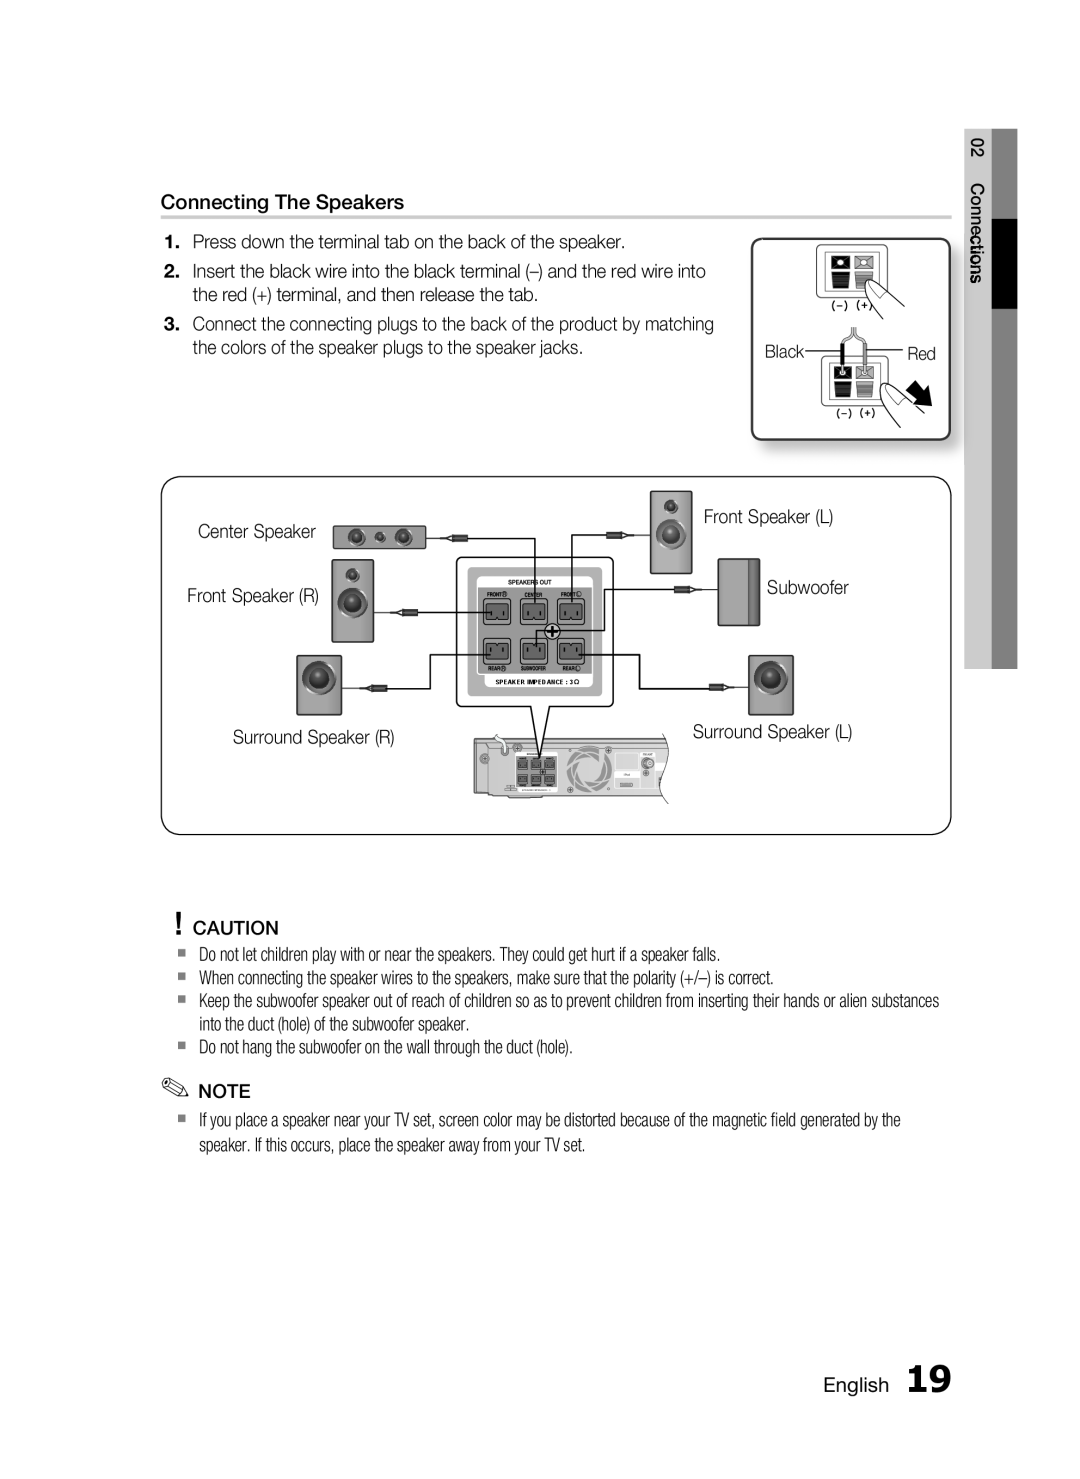 Samsung AH68-02258S, HT-C5500 user manual Connecting The Speakers, English 